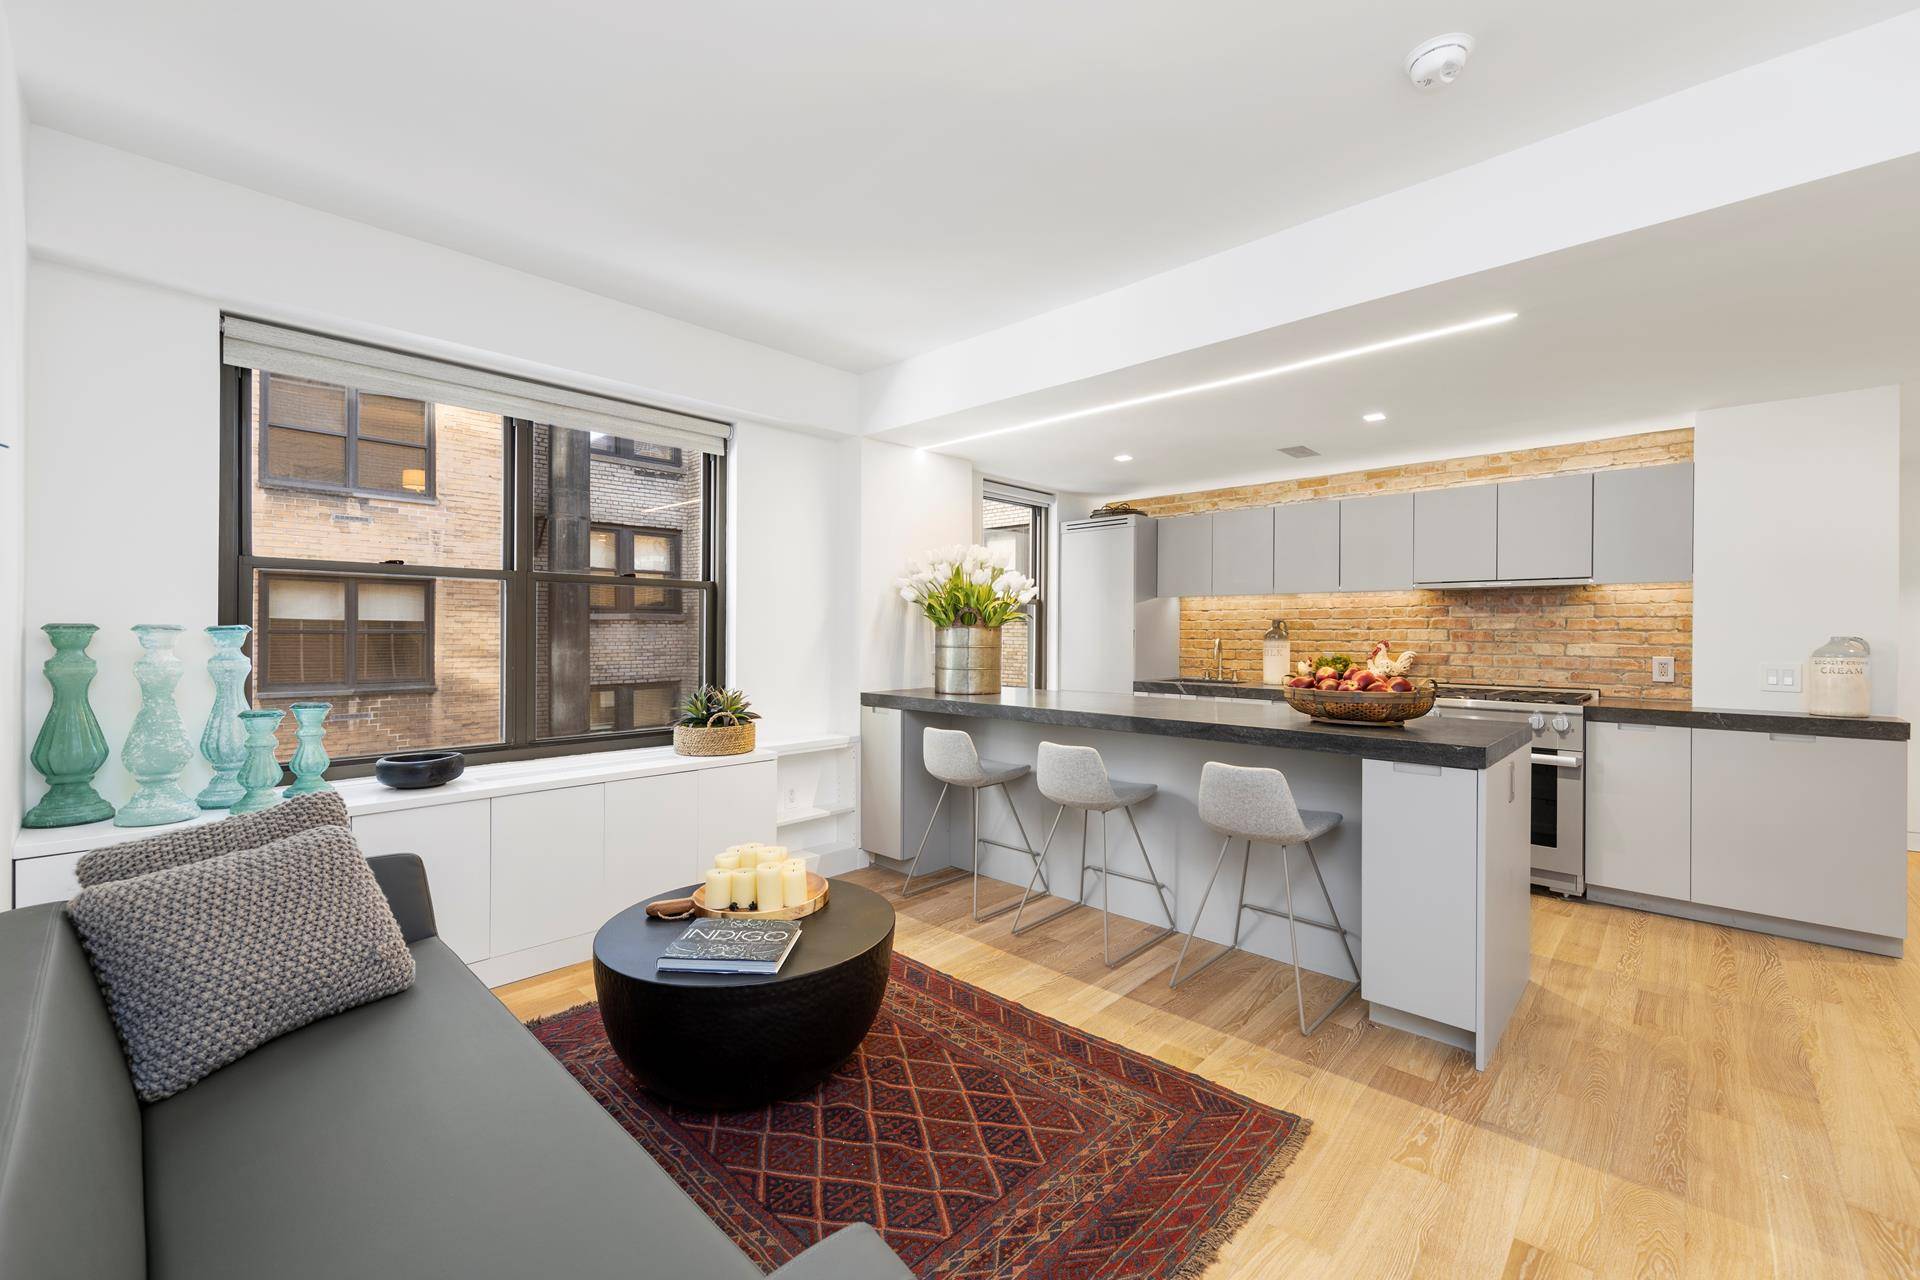 Welcome home to this triple mint and completely gut renovated convertible two bedroom two bath home conveniently located on 38th St between Madison and Park Avenue.